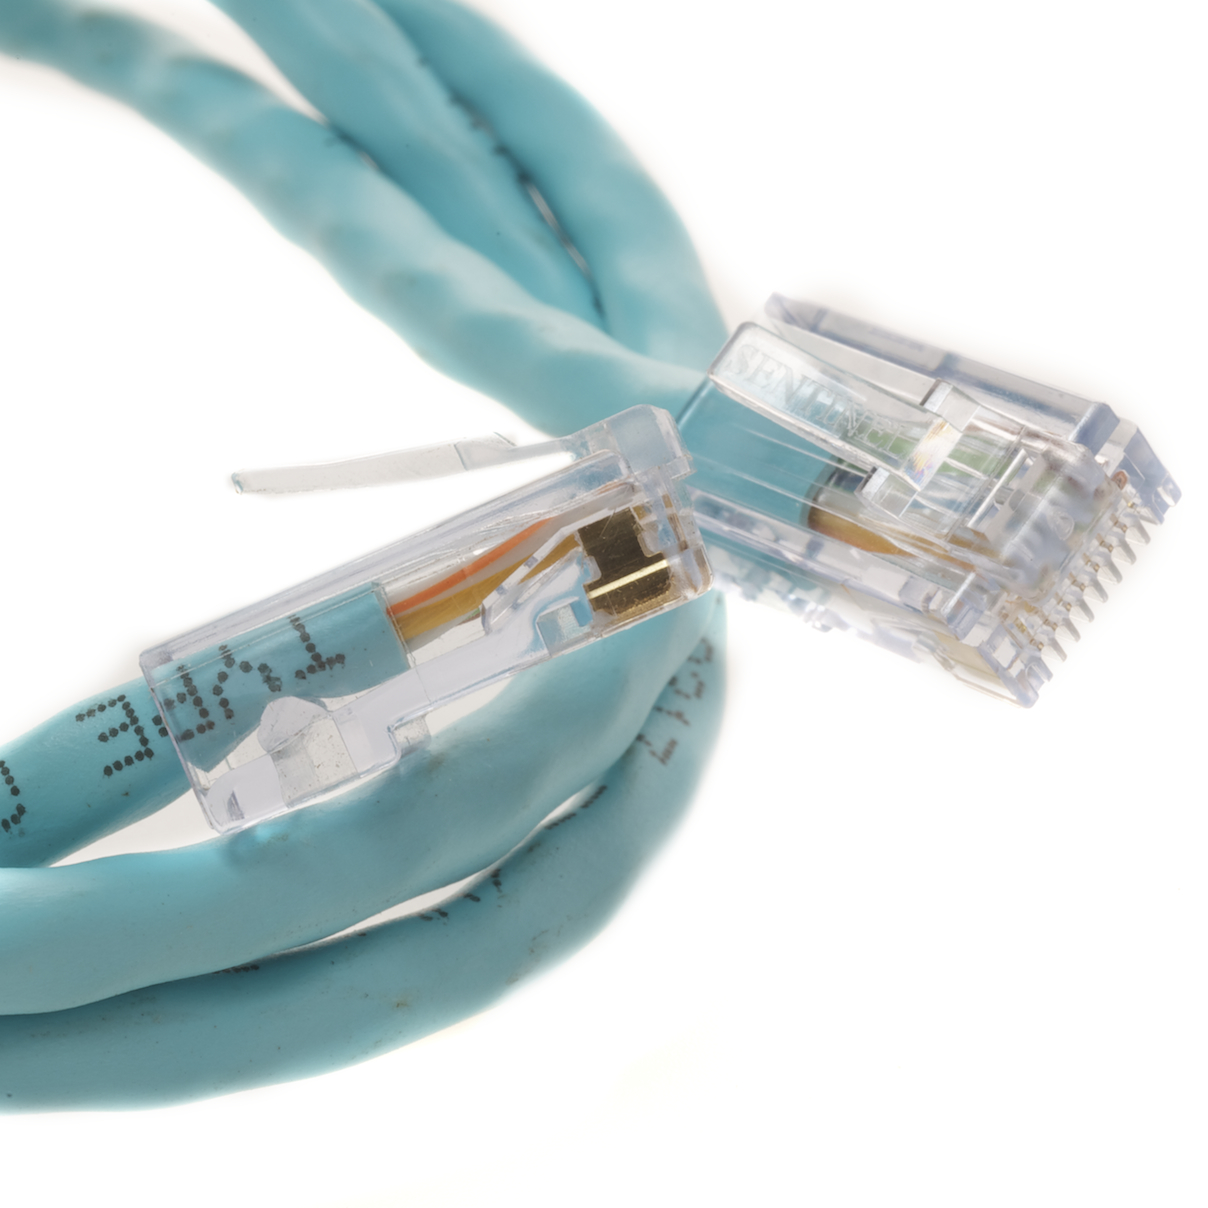 Network Patch Cables in Spring Colors